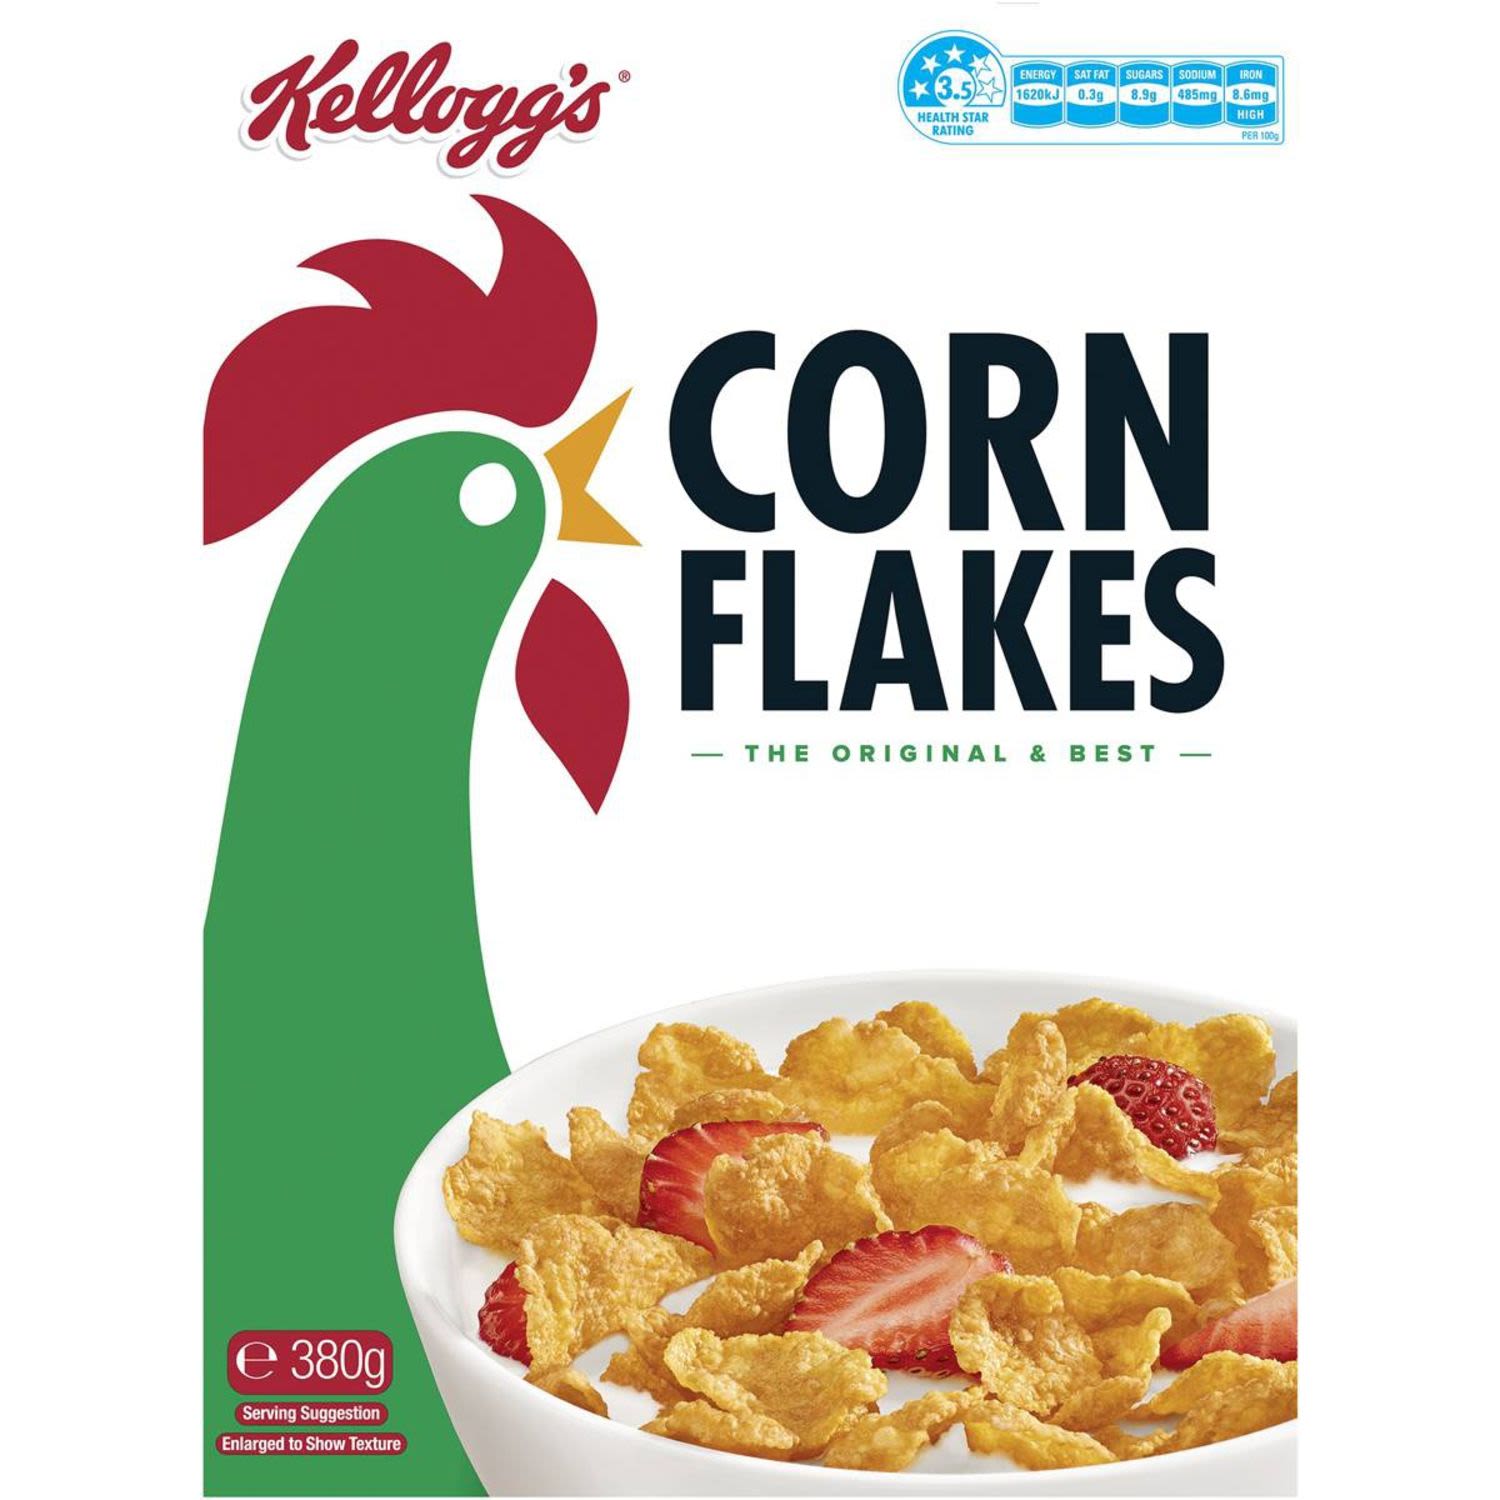 Kellogg's Corn Flakes is the original Kellogg's breakfast cereal. Across Australia and New Zealand, it is one of the first brands most people think of when they think of breakfast cereal. Corn Flakes are crisp, light flakes of sun-ripened corn, that not only taste good but give you a nutritious start to the day!<br /> <br />